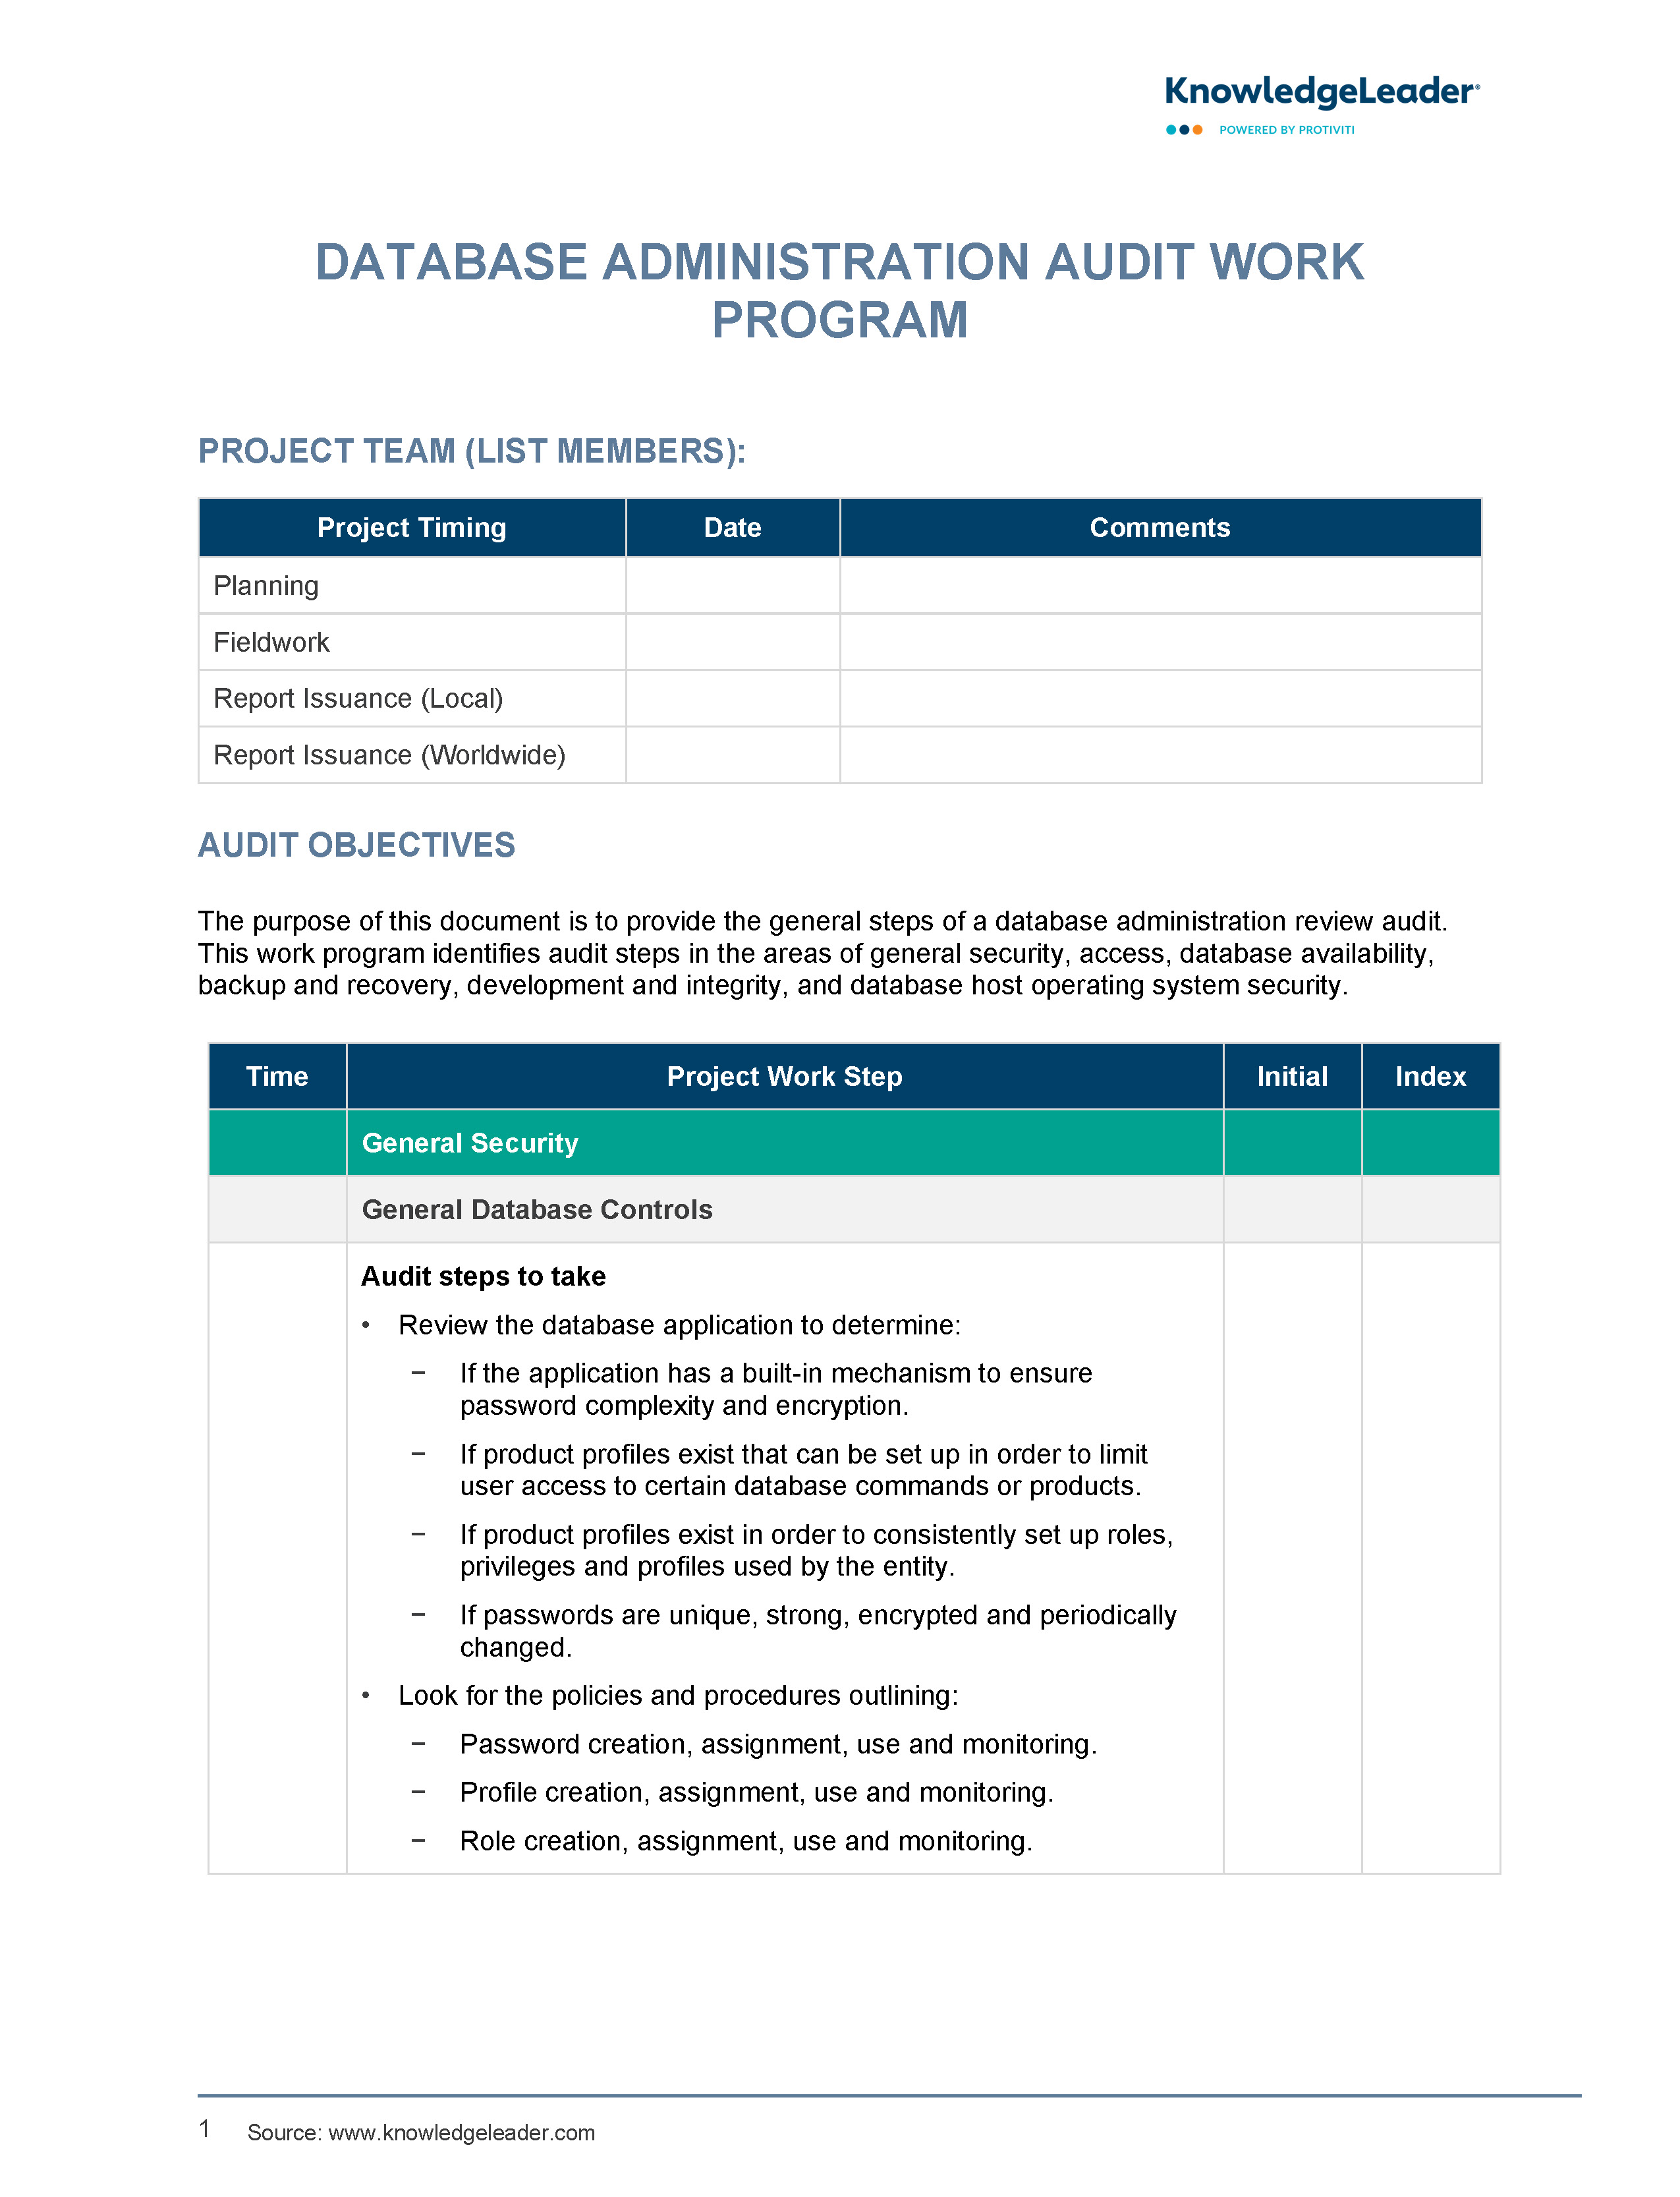 Screenshot of the first page of Database Administration Audit Work Program